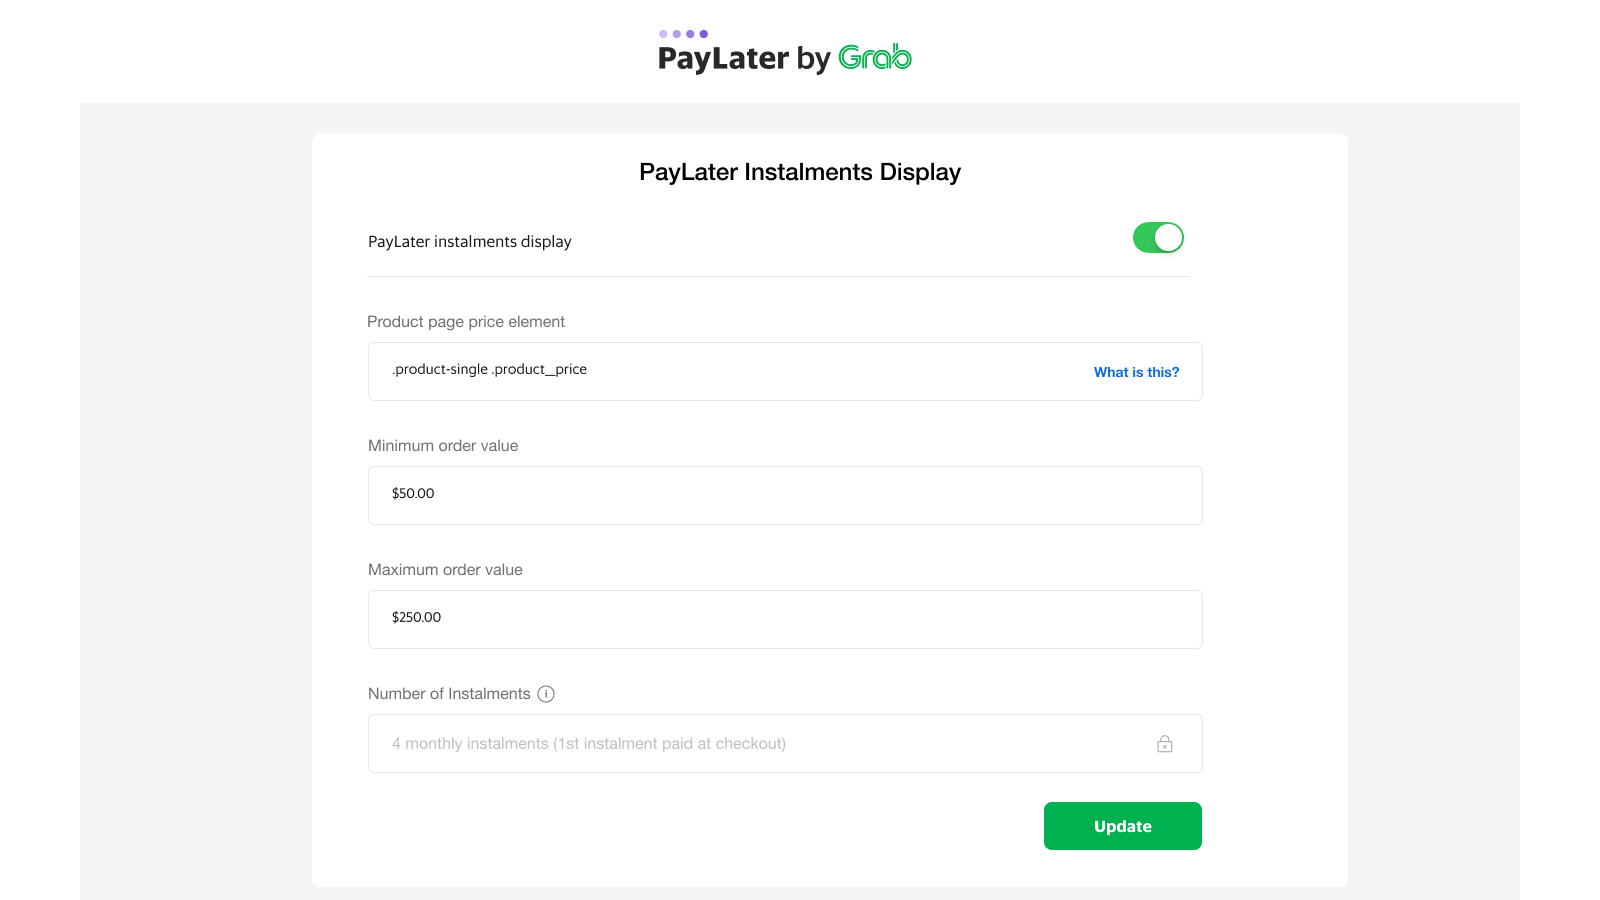 Step 3: Configure your PayLater Instalments Display settings